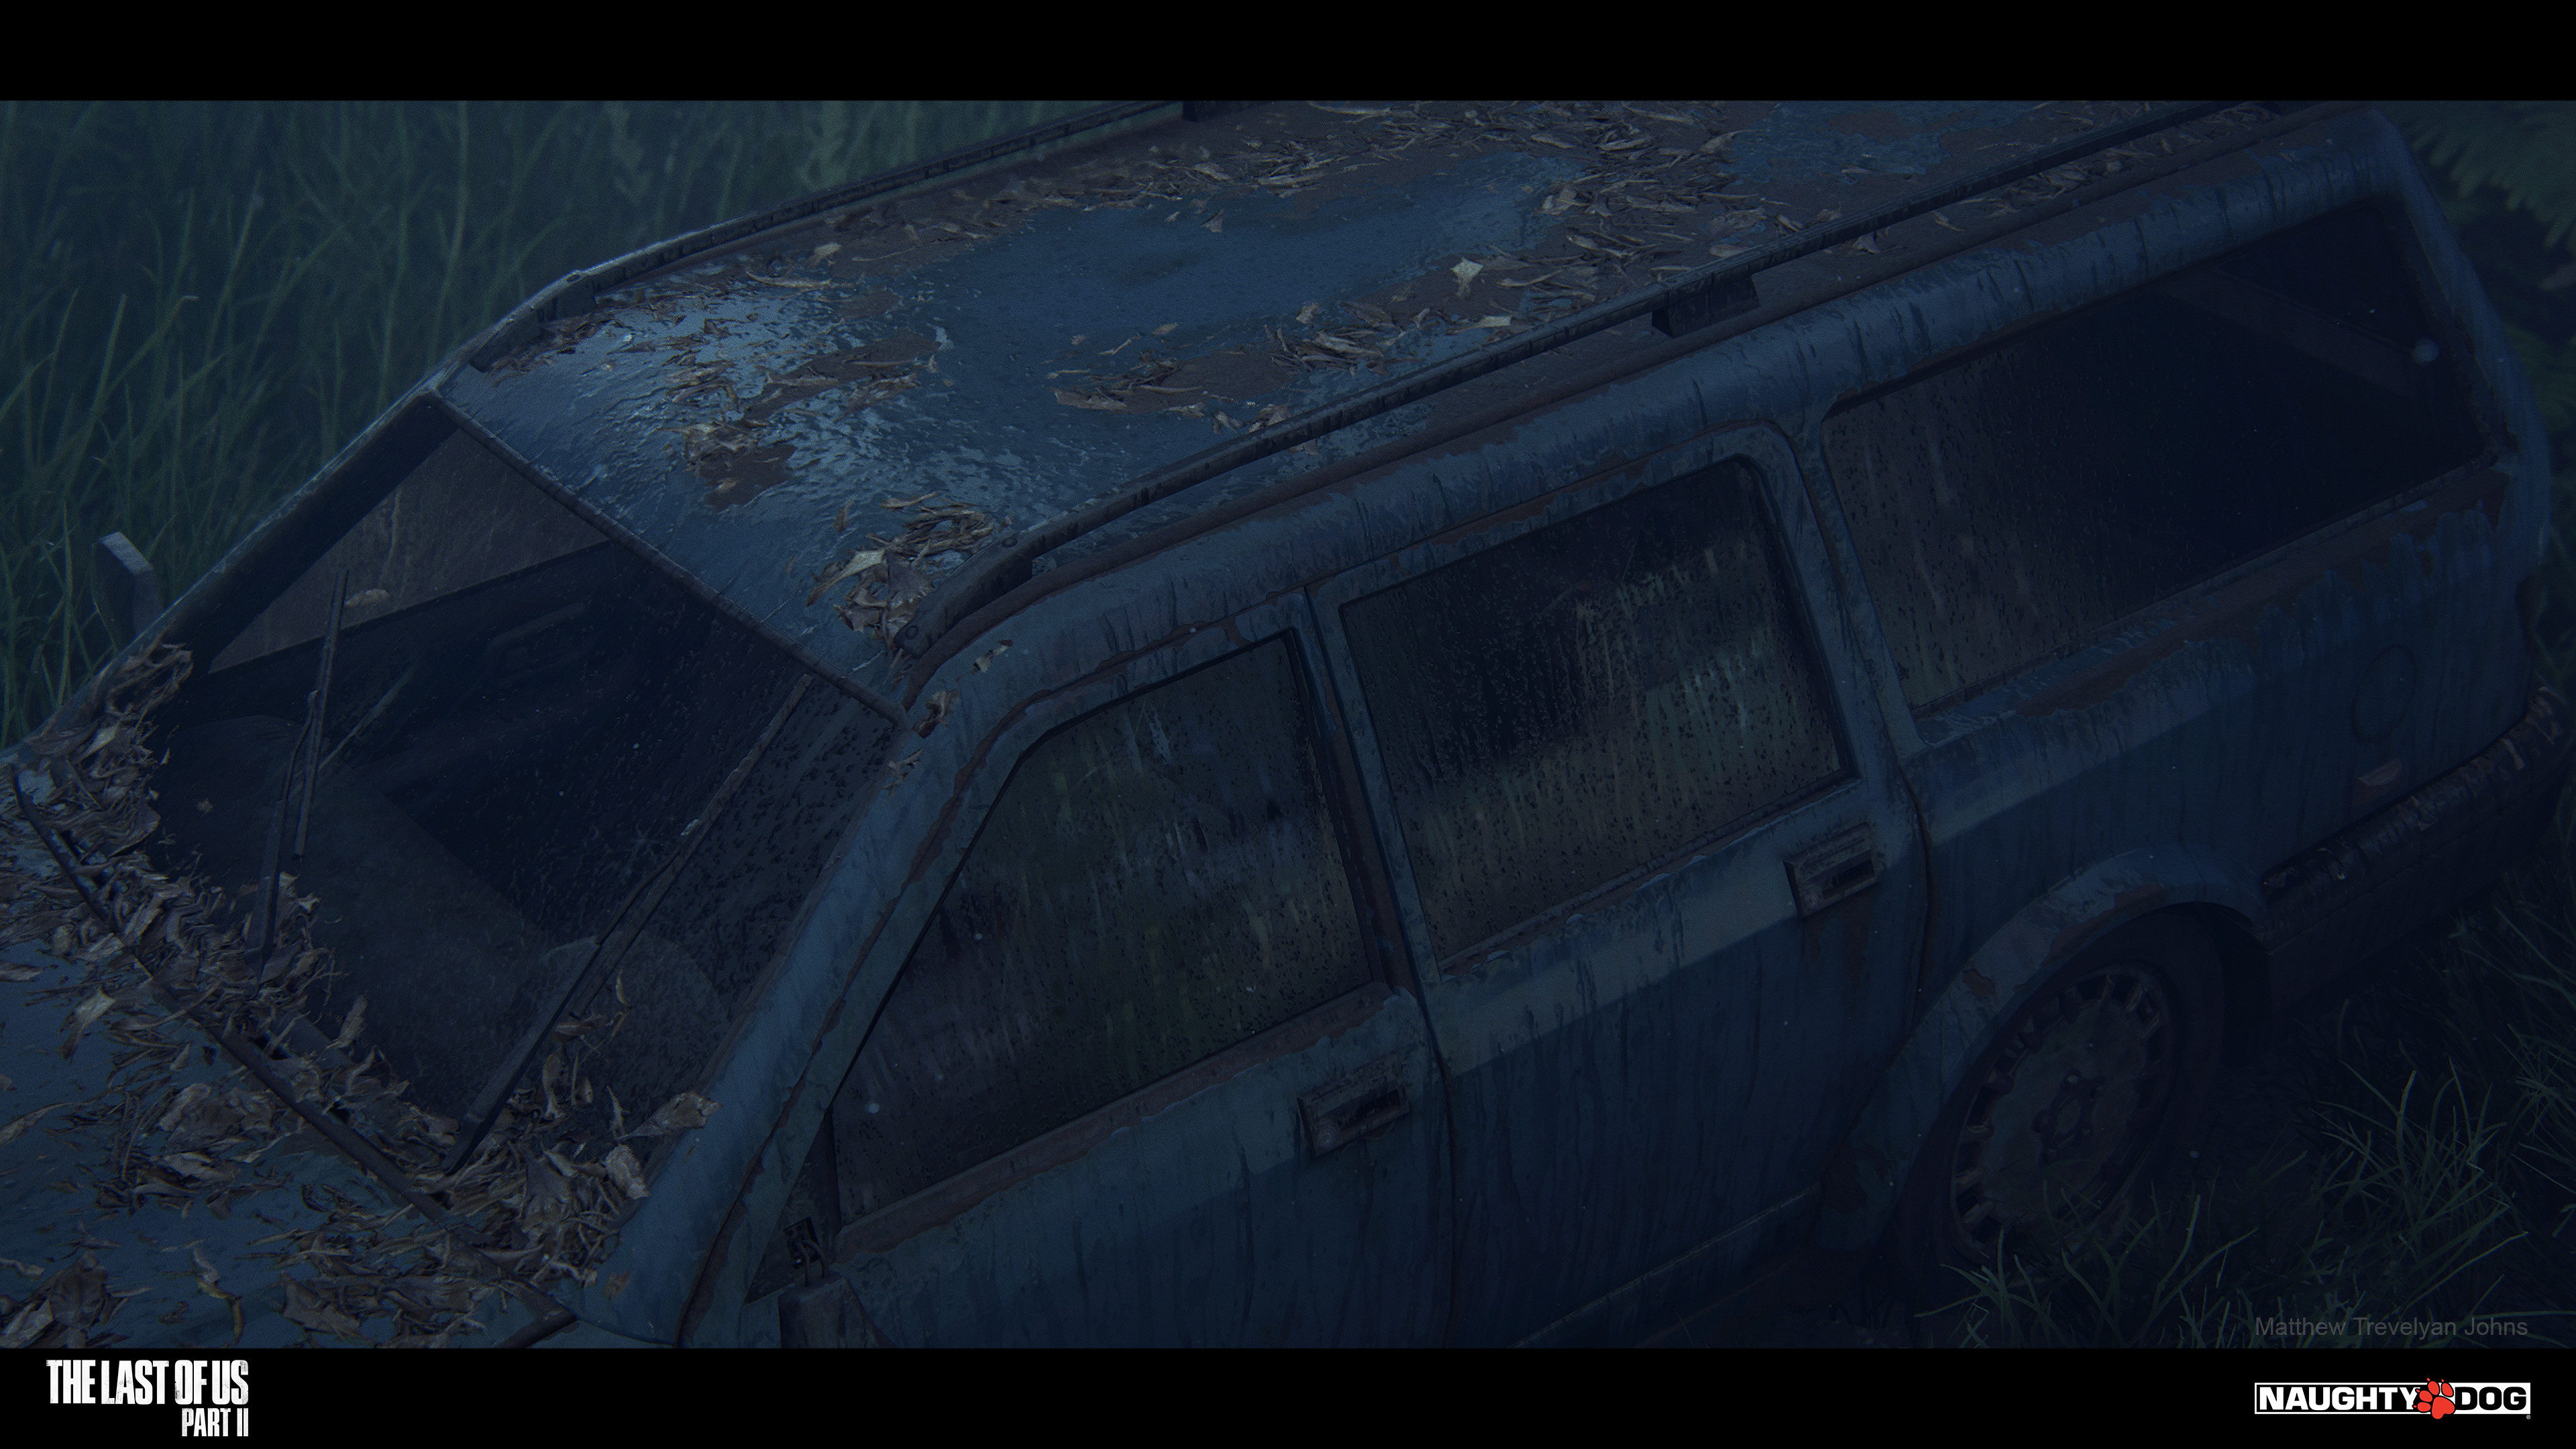 This station wagon featured in the 2018 E3 demo, Ellie slid across the bonnet (hood for my American friends) as the windscreen was shot out, this was one of the first vehicles I really felt I'd come close to establishing the final wetness look on